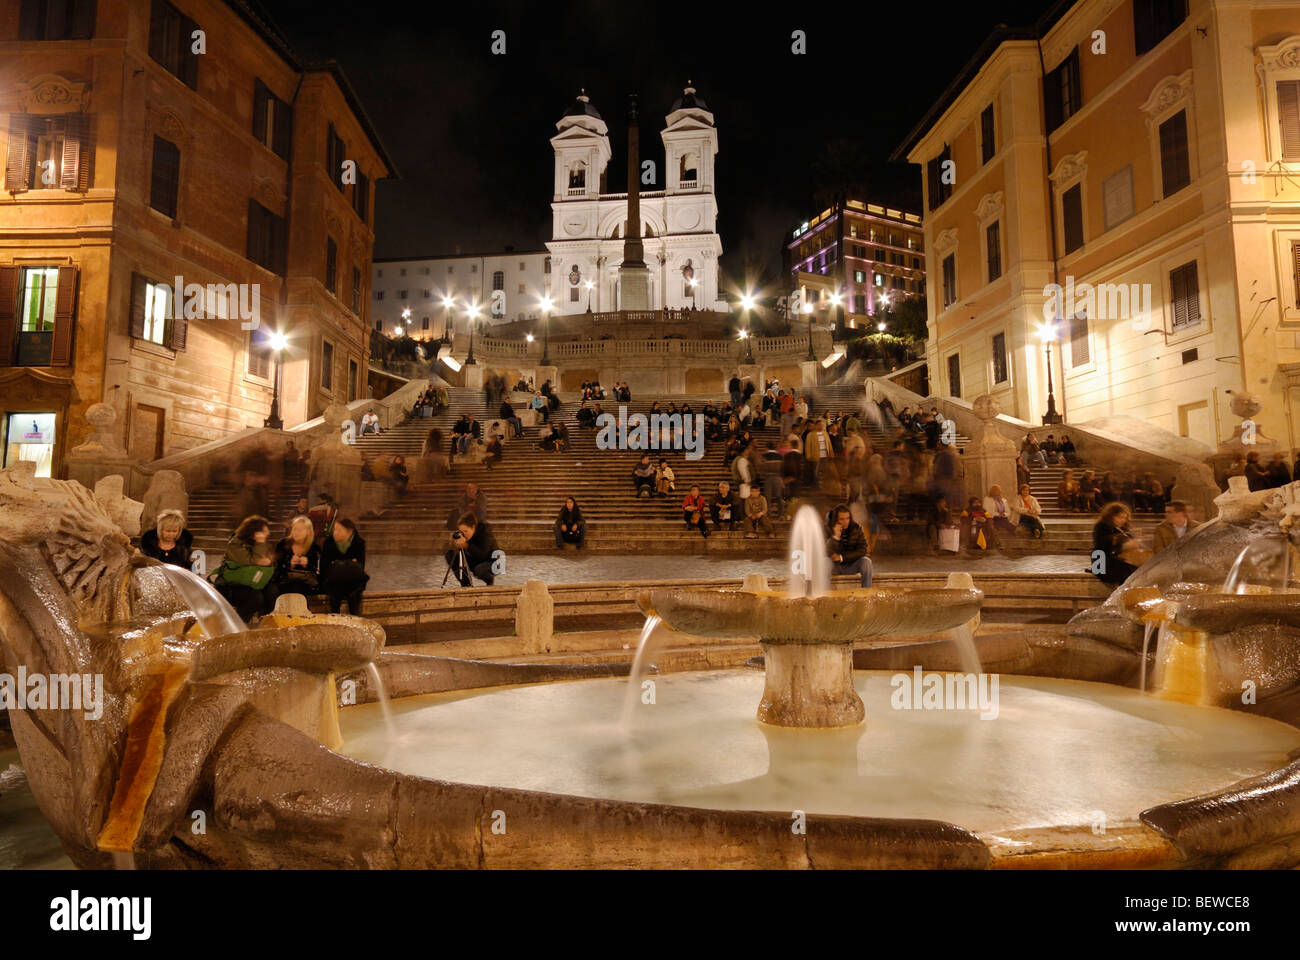 The Fountain of the Old Boat (Fontana della Barcaccia) in front of the Spanish Steps at night, Rome, Italy Stock Photo